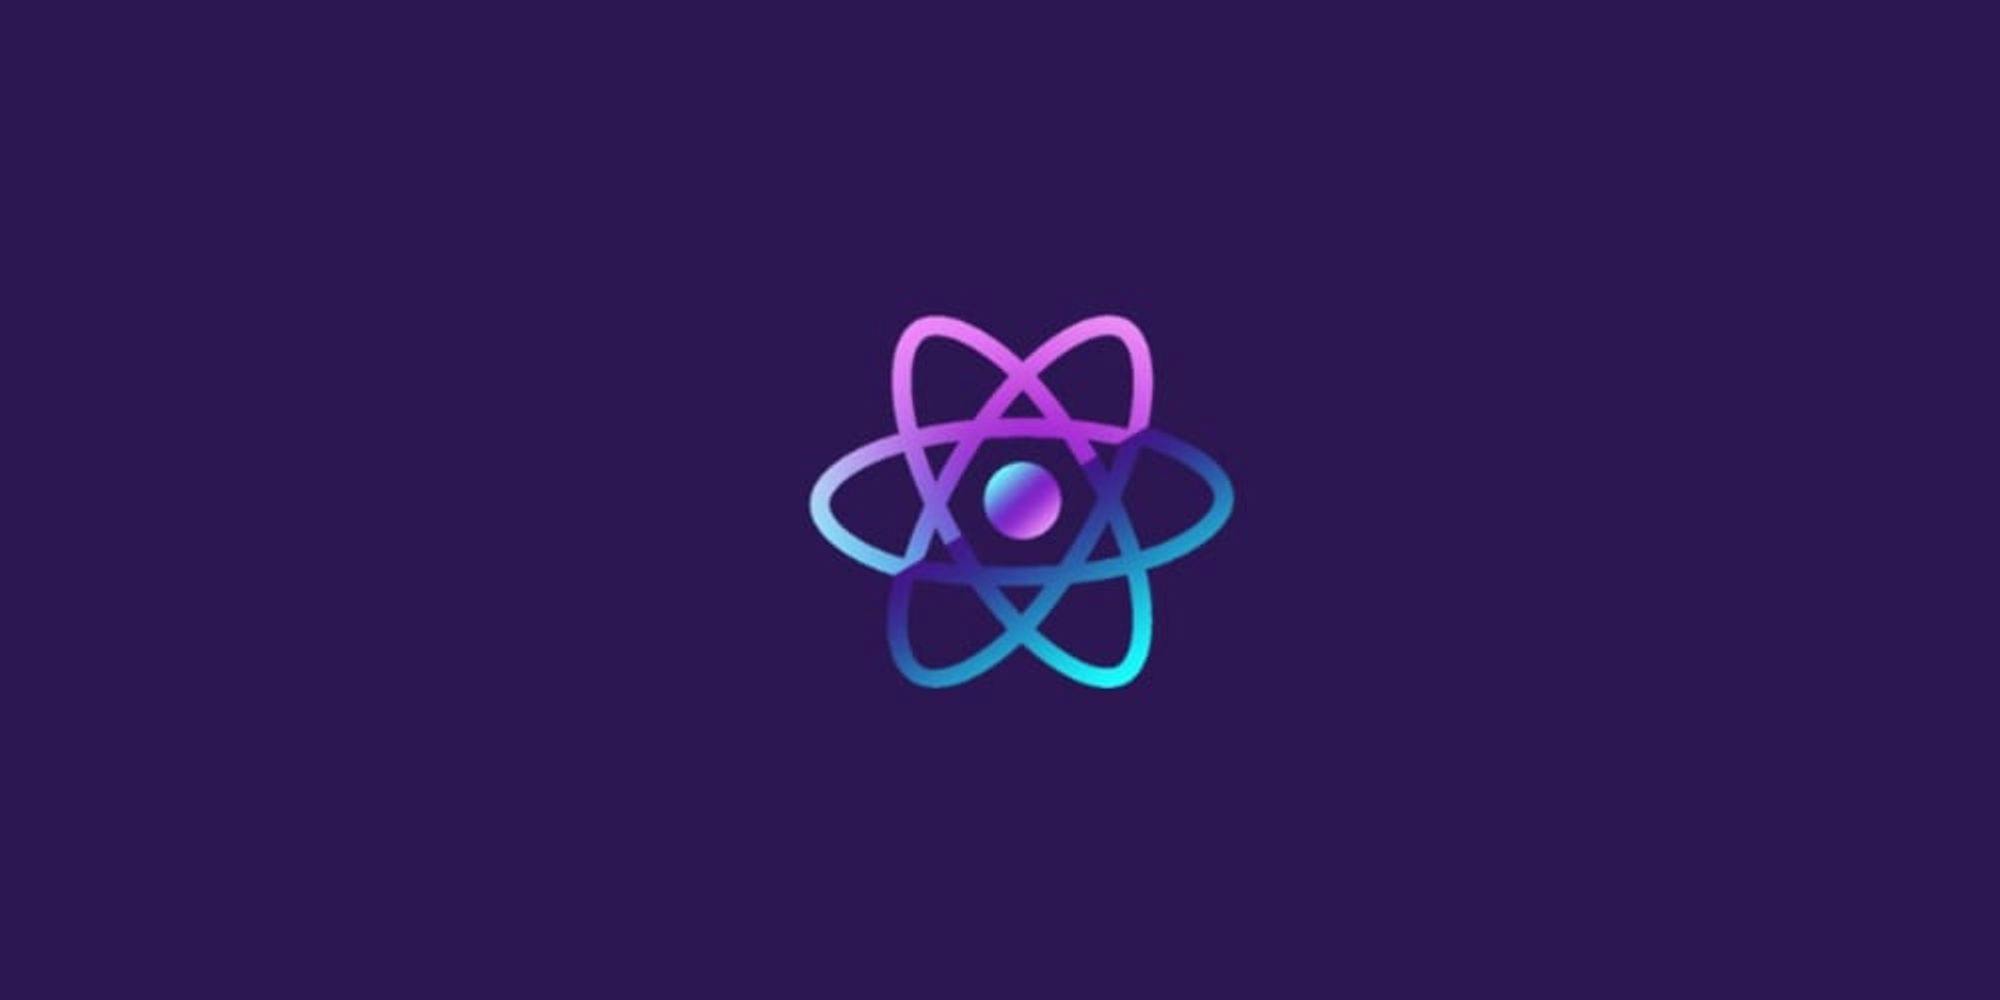 7 Tools for Faster Development in React